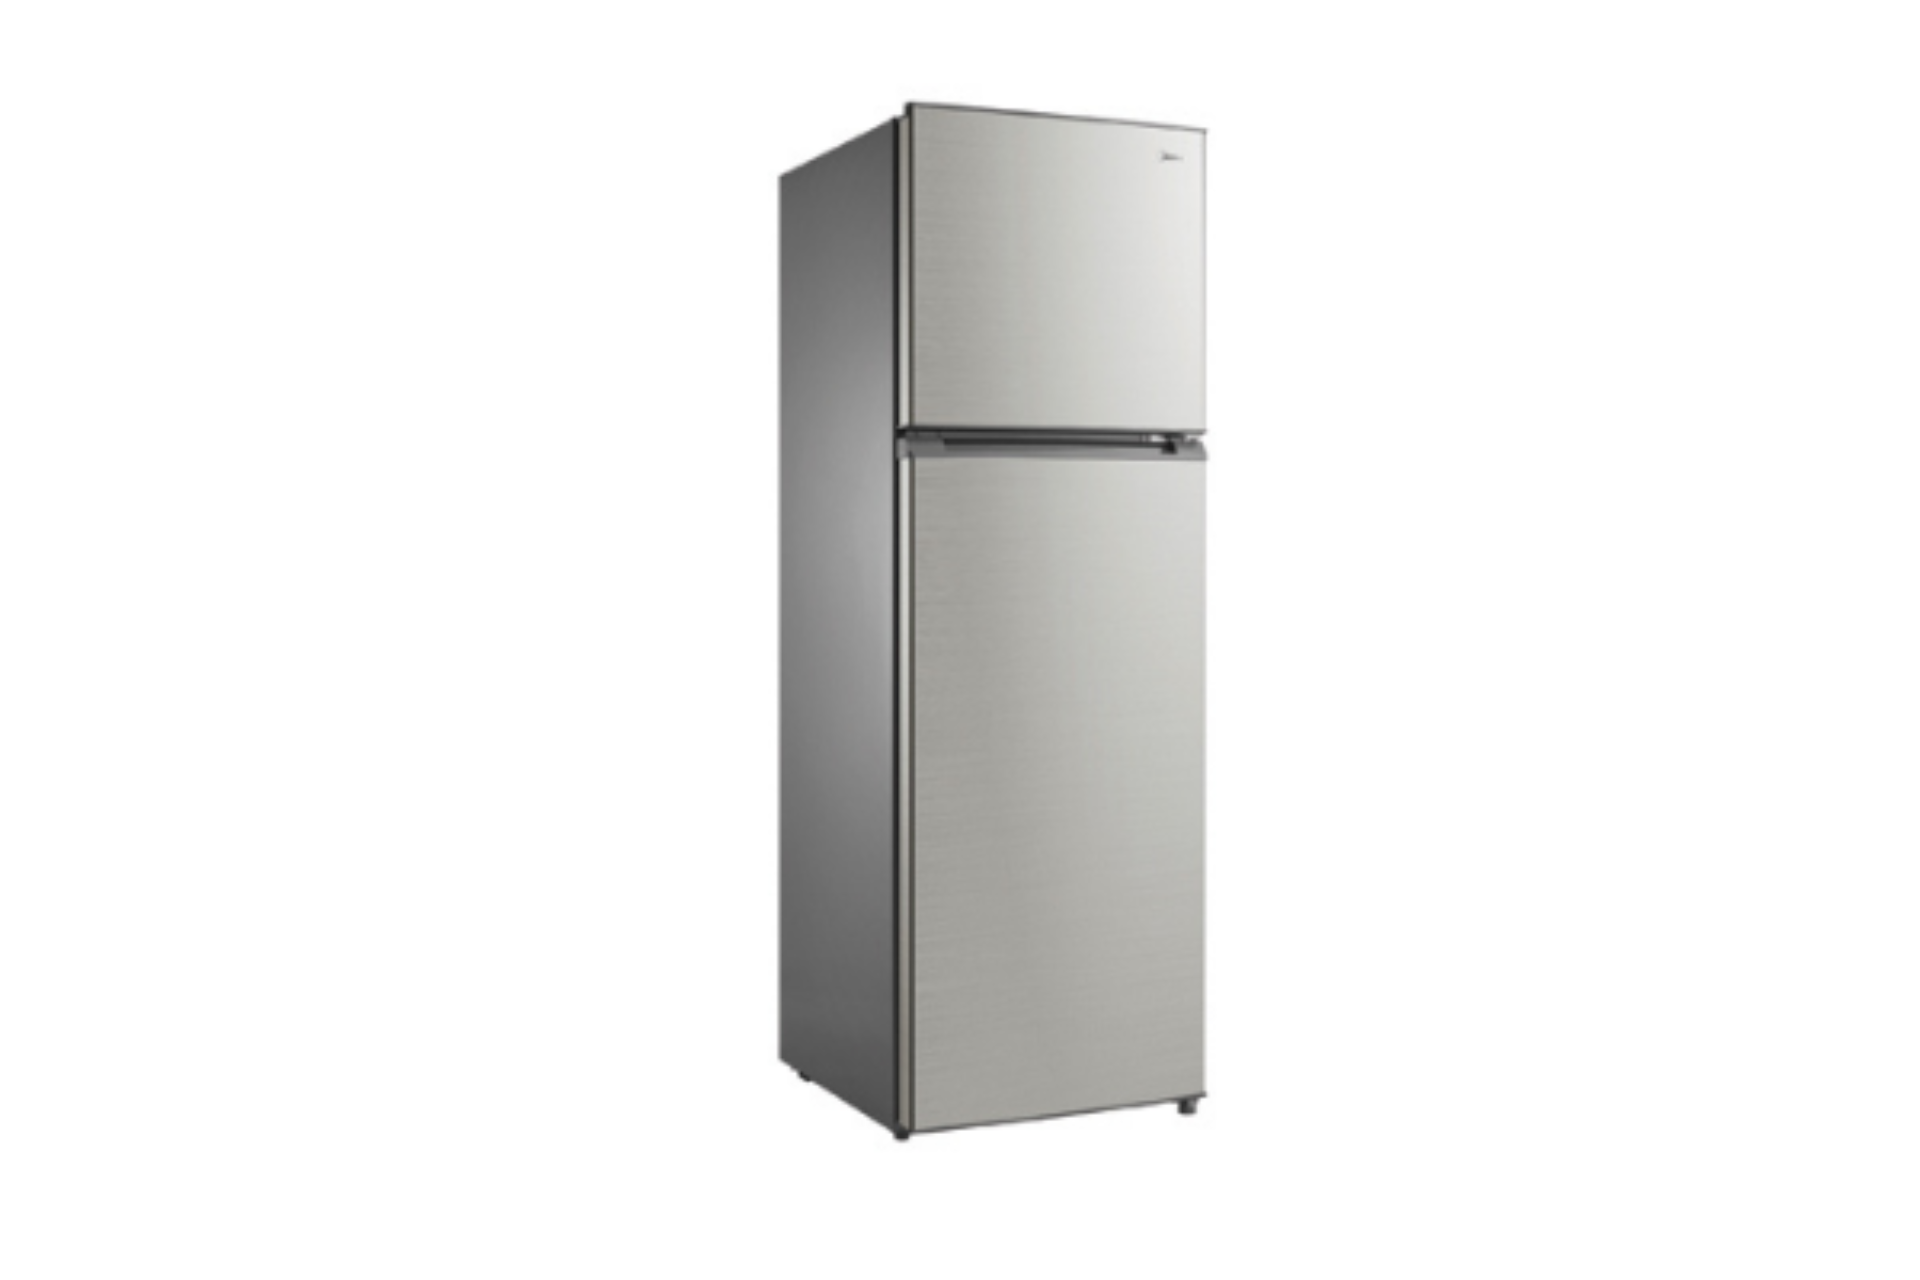 Unpacking the Benefits of Owning a Midea Refrigerator